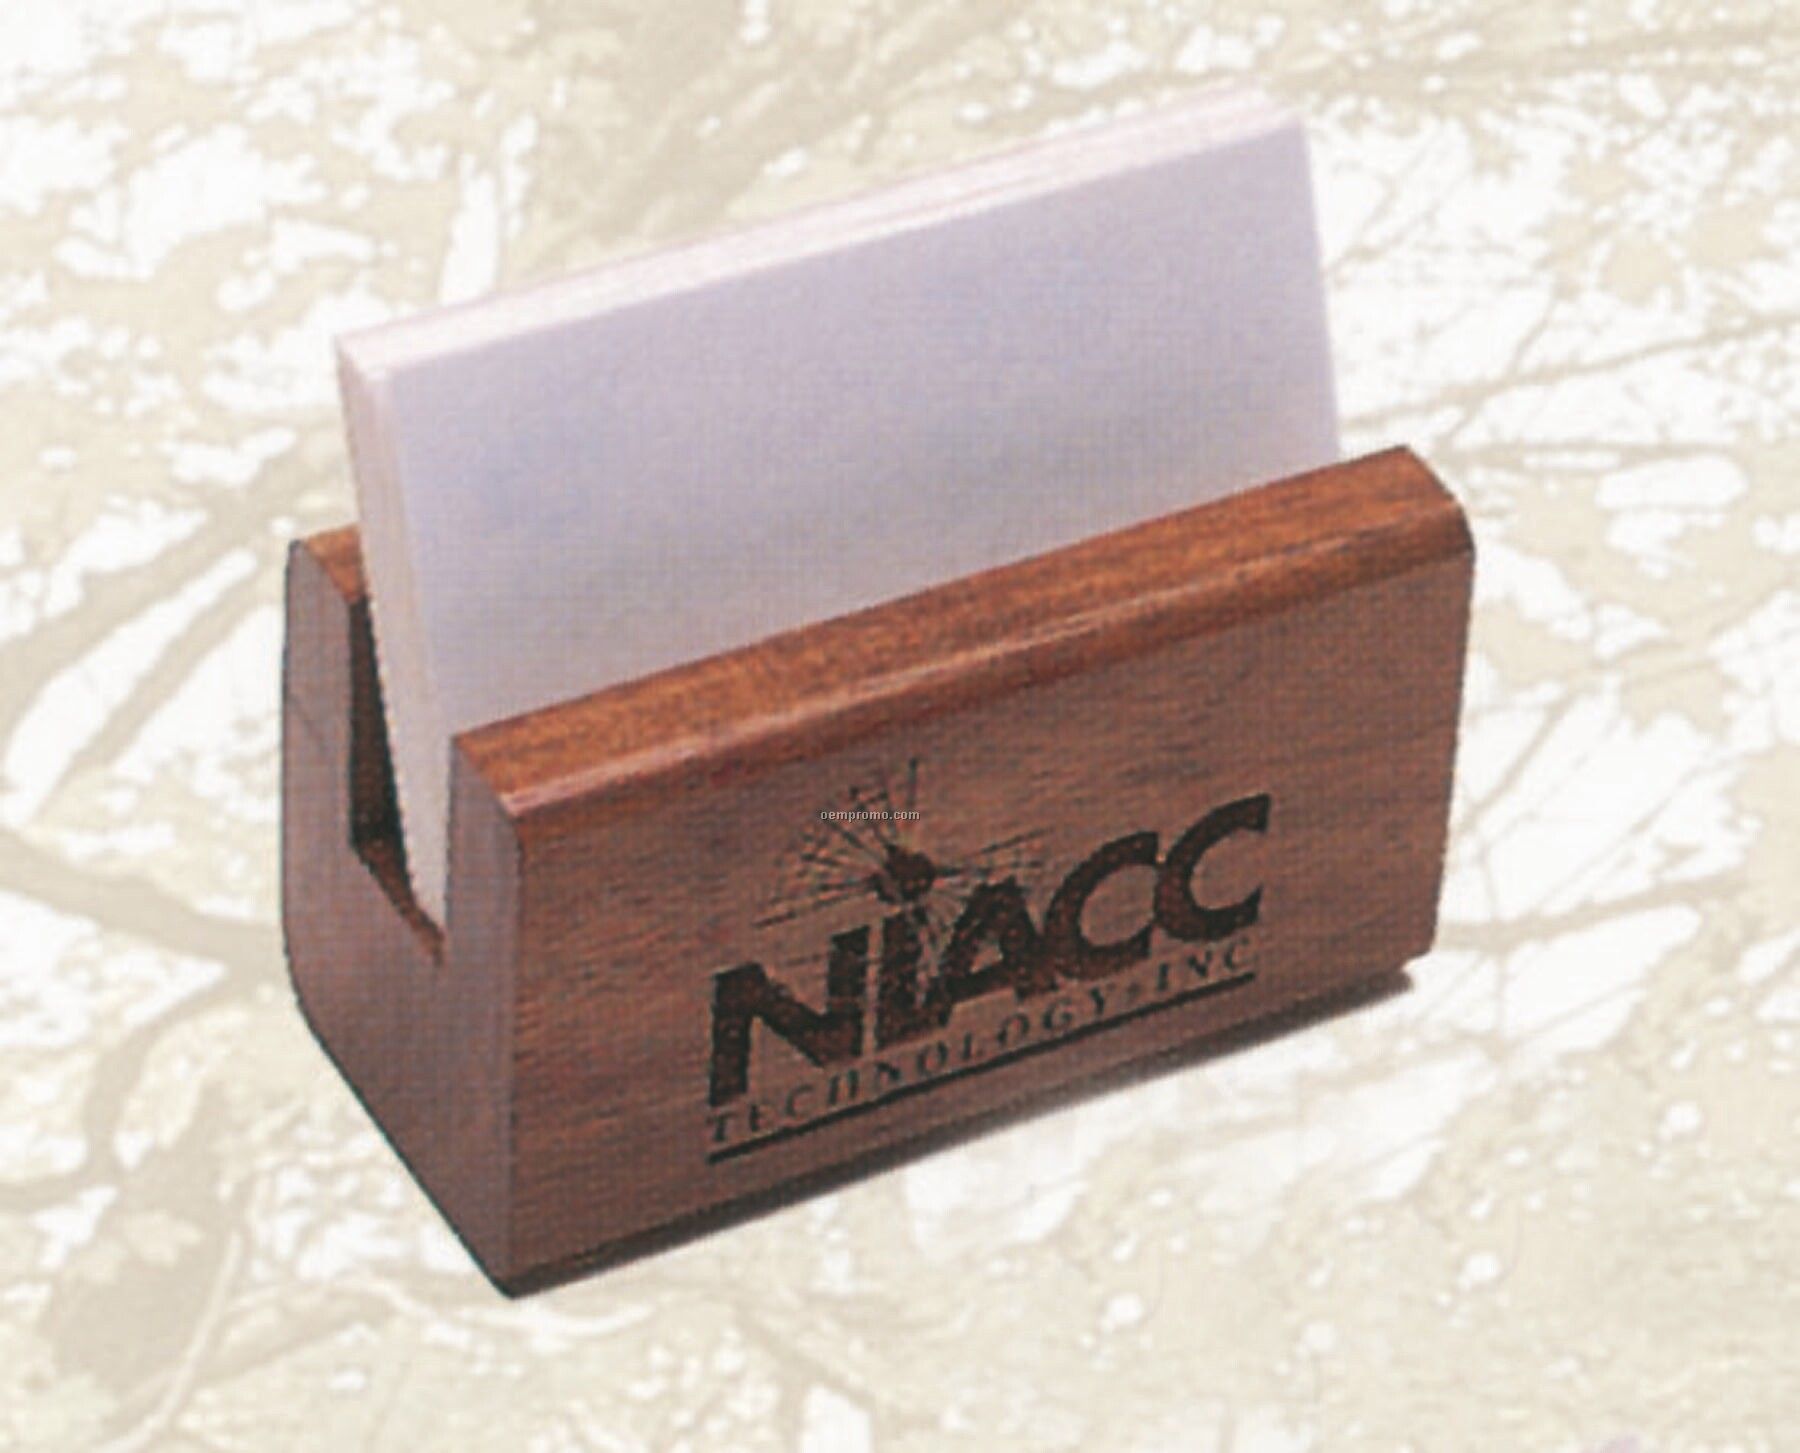 Slotted Business Card Holder (3 5/8"X1 3/4"X2")